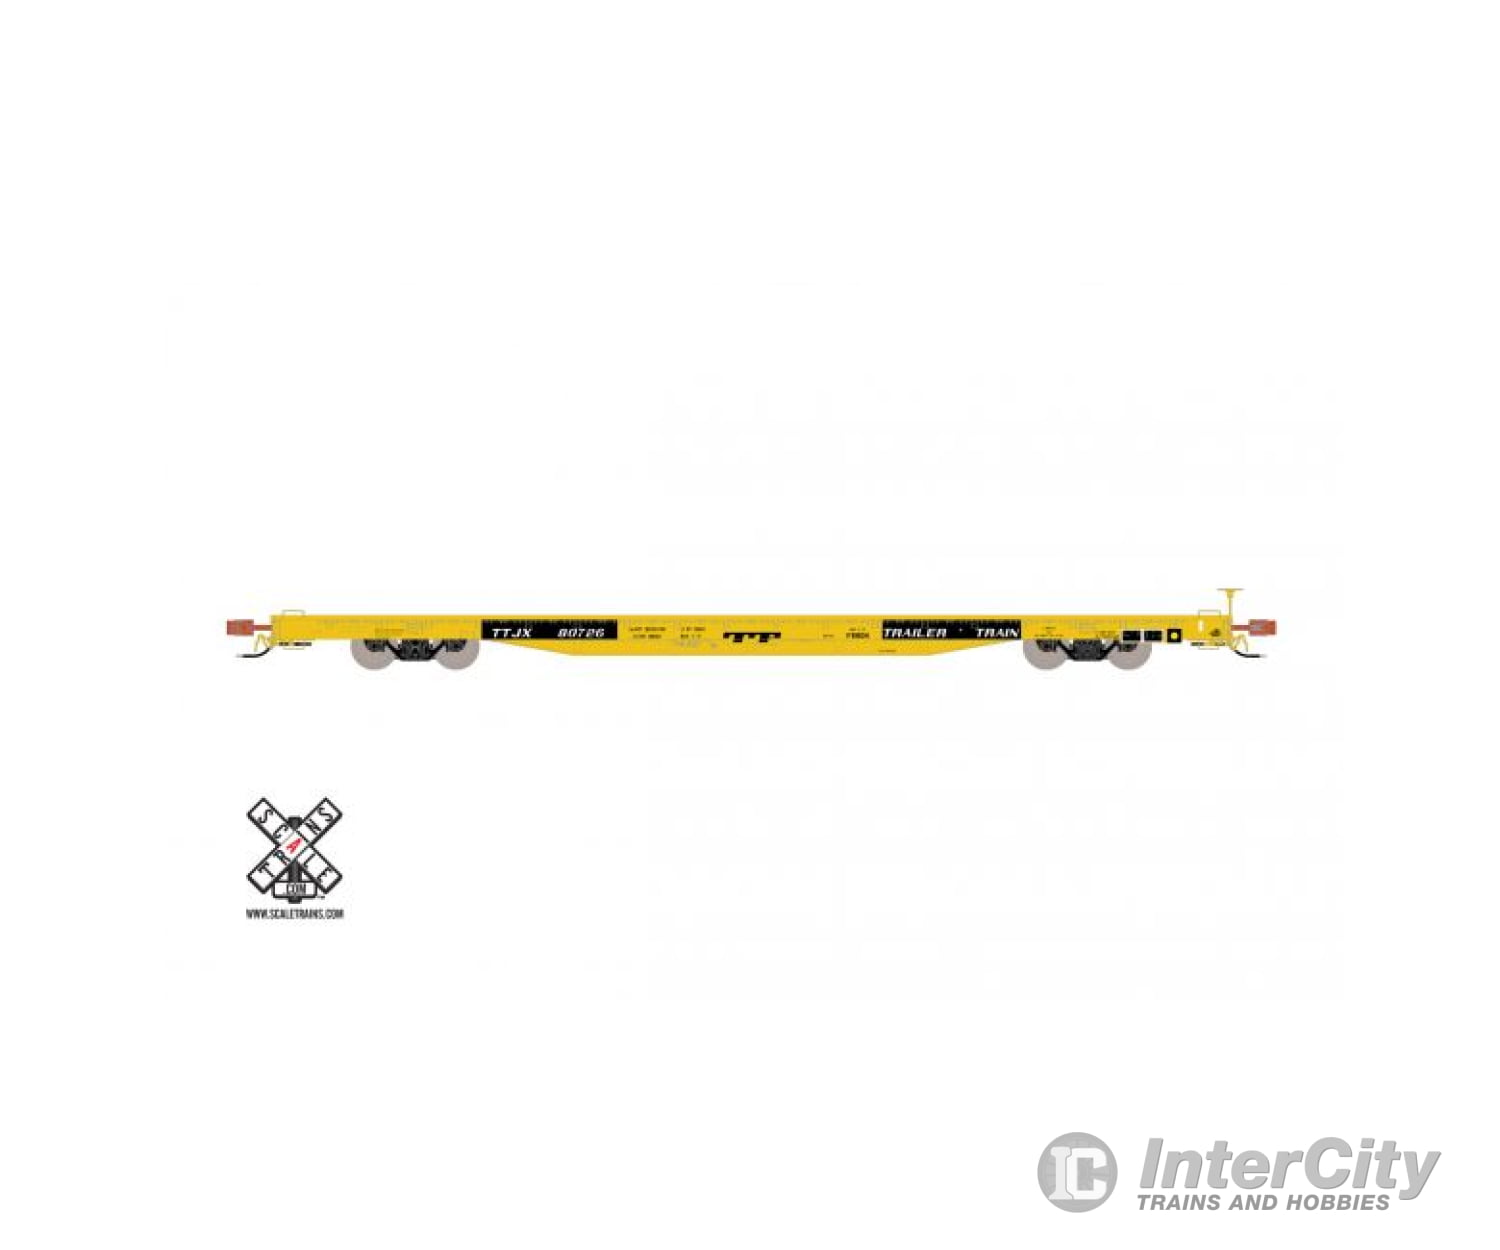 Scale Trains Sxt32731 Rivet Counter Ho Bsc F68Dh Flat Car Trailer Train/As Delivered/Ttjx Rd#81184